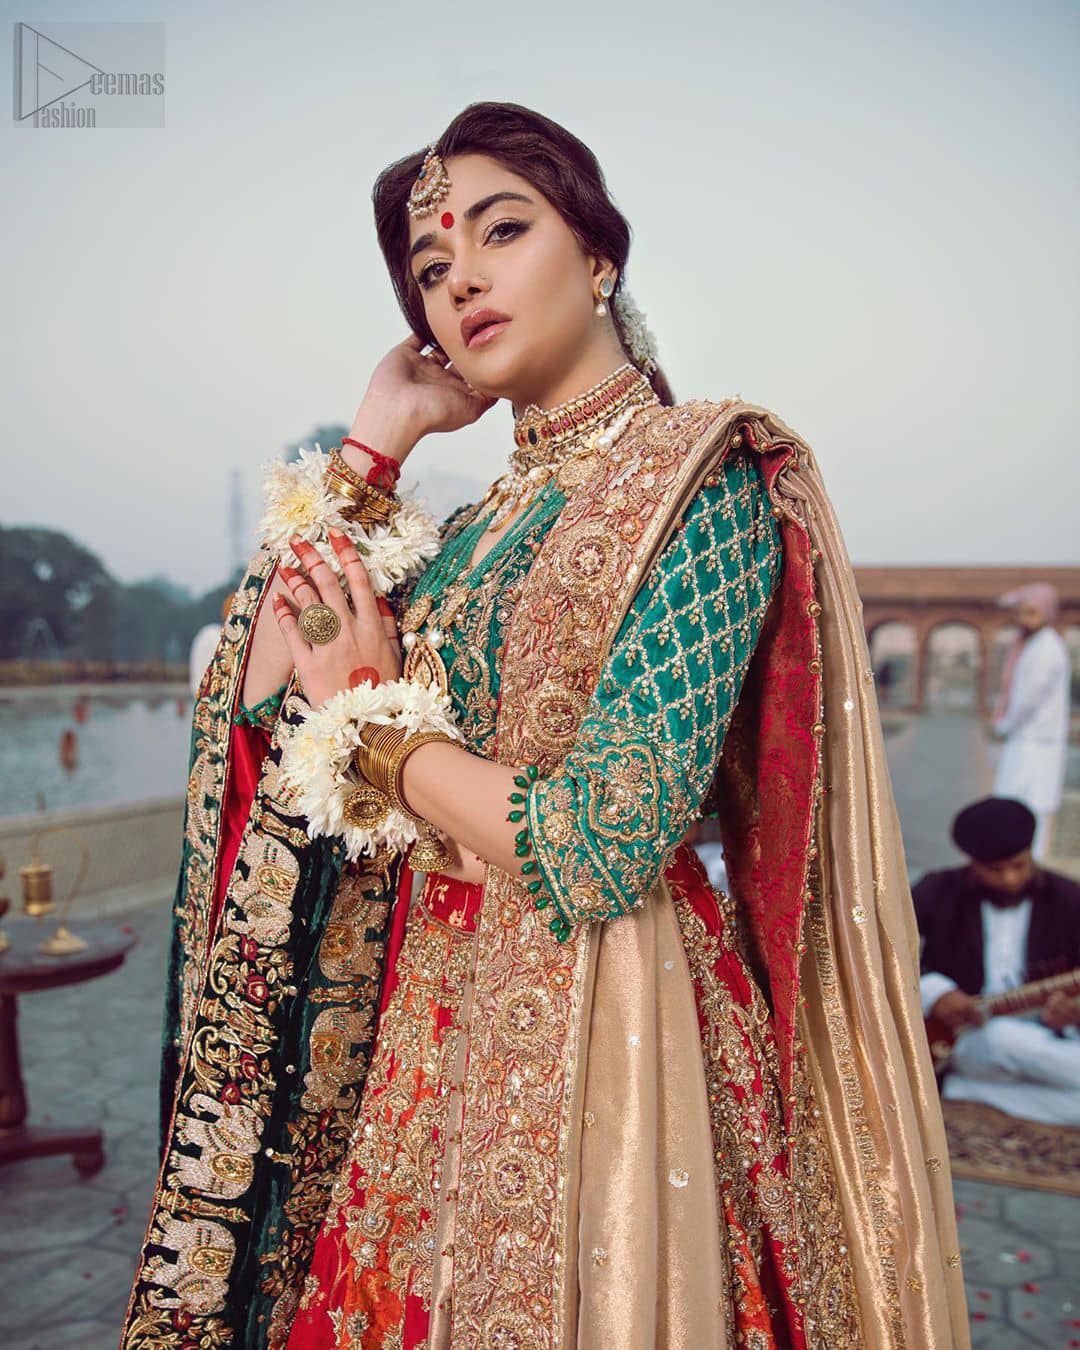 Classic, timeless and truly beautiful, our bridal dress is perfect for your unforgettable day. Excellence of craftsmanship is evident with intricate detailing that features the use of zardozi work. The blouse is beautifully adorned with geometric patterns and floral embroidery with golden zardozi work and finished with dangling beads. Complete the look with artfully coordinated lehenga which is ornamented with a bold and captivating design with a traditional intricate embroidery and scattered tiny floral motifs. The combination of red and orange for lehenga is also captivating. Elegance is personified when it gets paired up with golden dupatta having four sided embroidered border.